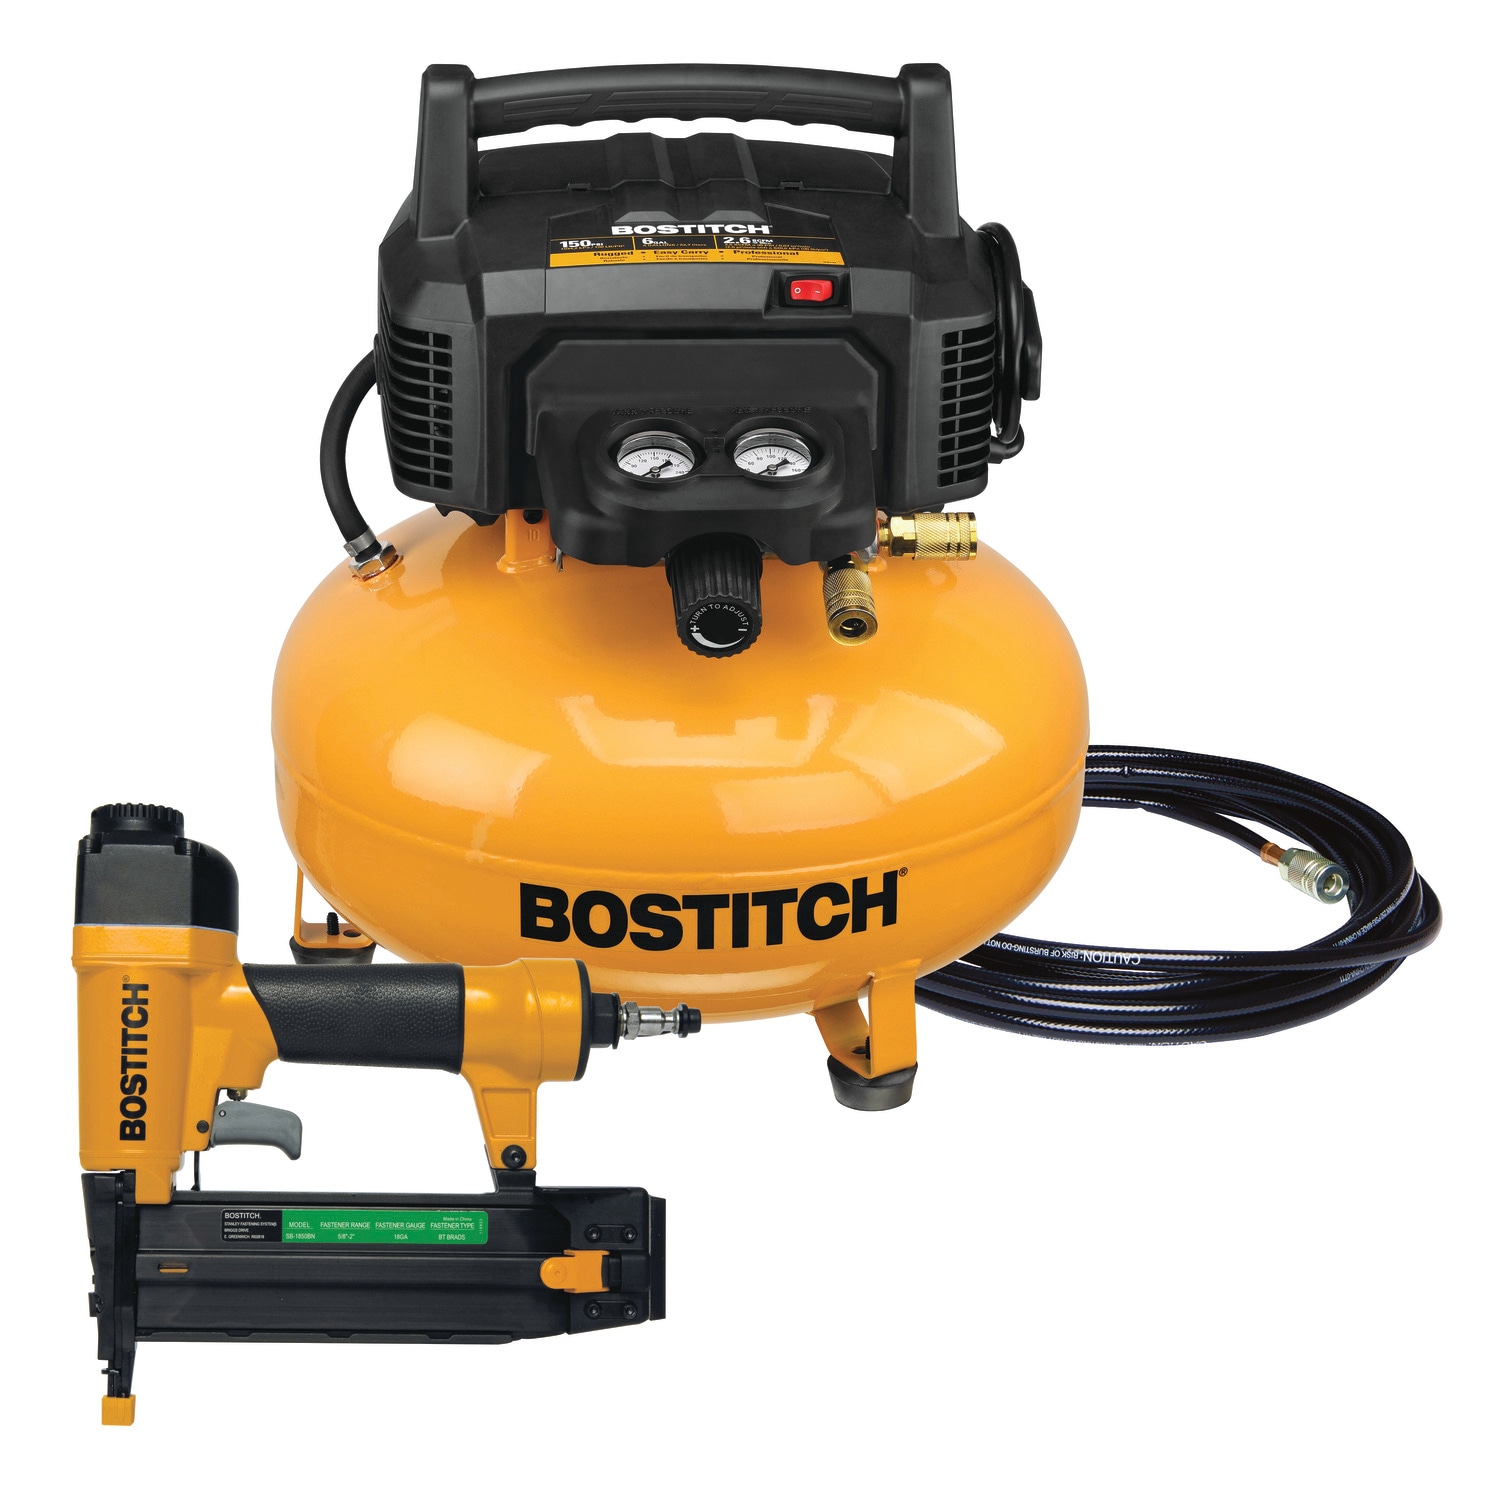 Bostitch 6-Gallon Single Stage Portable Corded Electric Pancake Air Compressor (1-Tool Included)